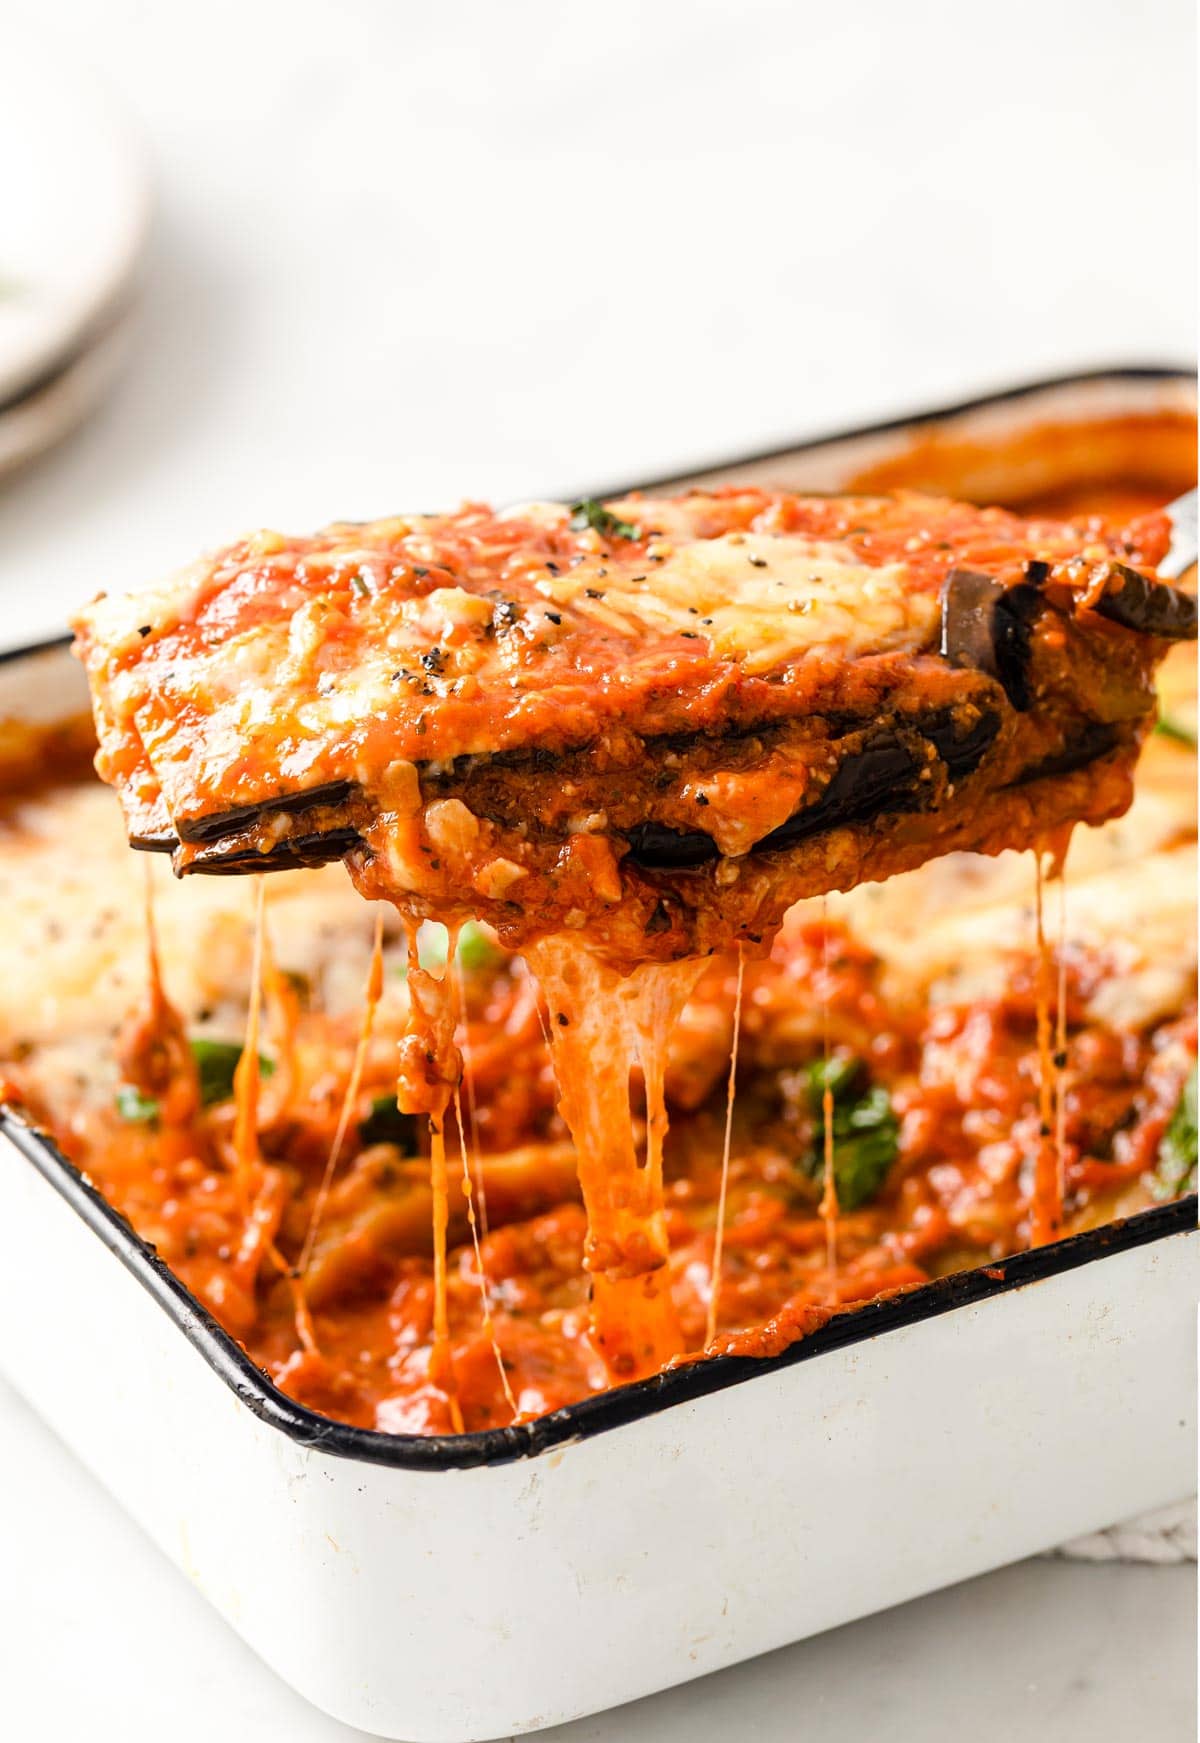 Spatula lifting a portion of baked aubergine parmigiana from a casserole dish